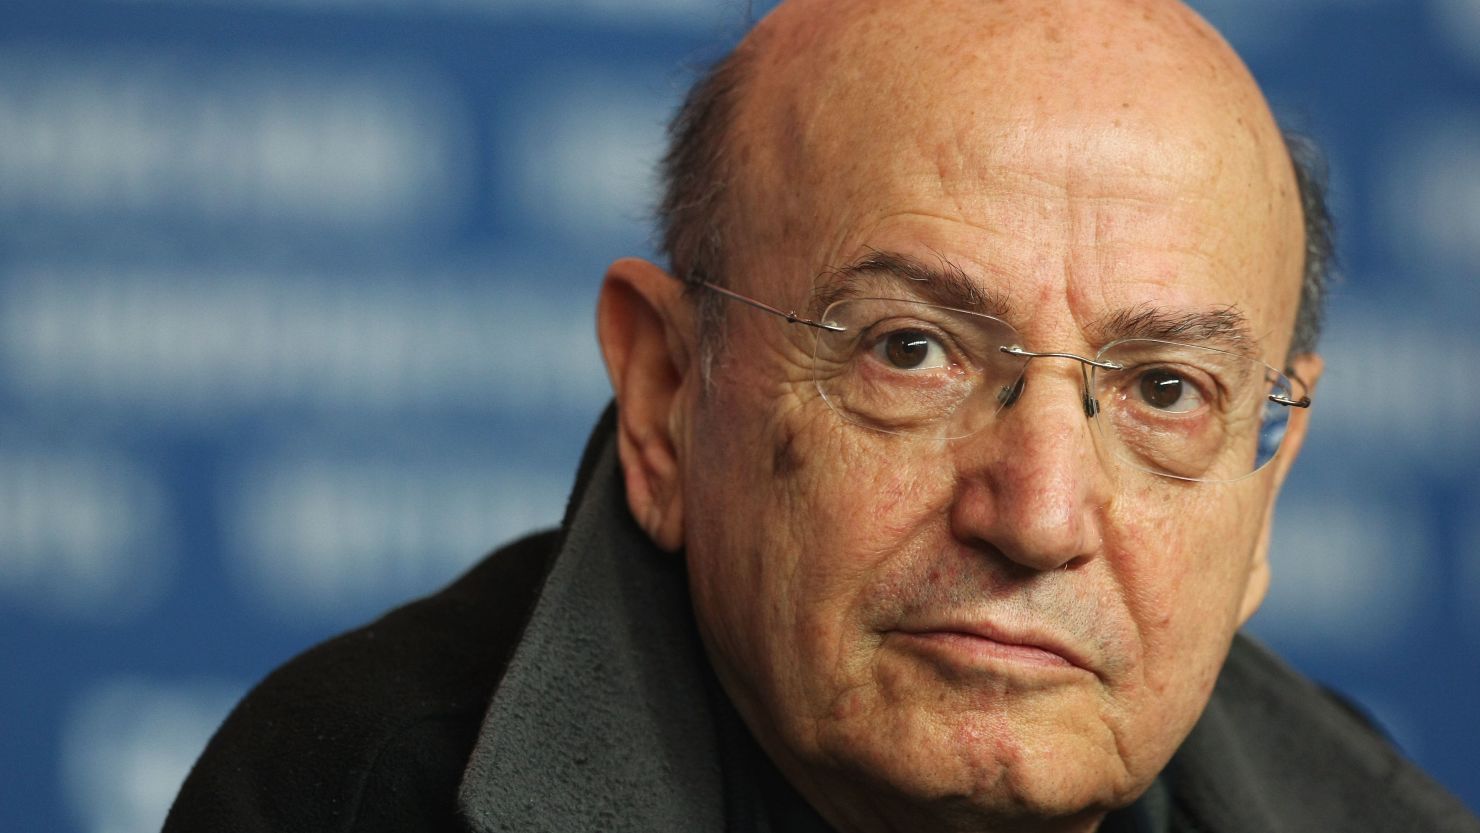 Theo Angelopoulos was an award-winning Greek director, famous for his dreamlike sequences.